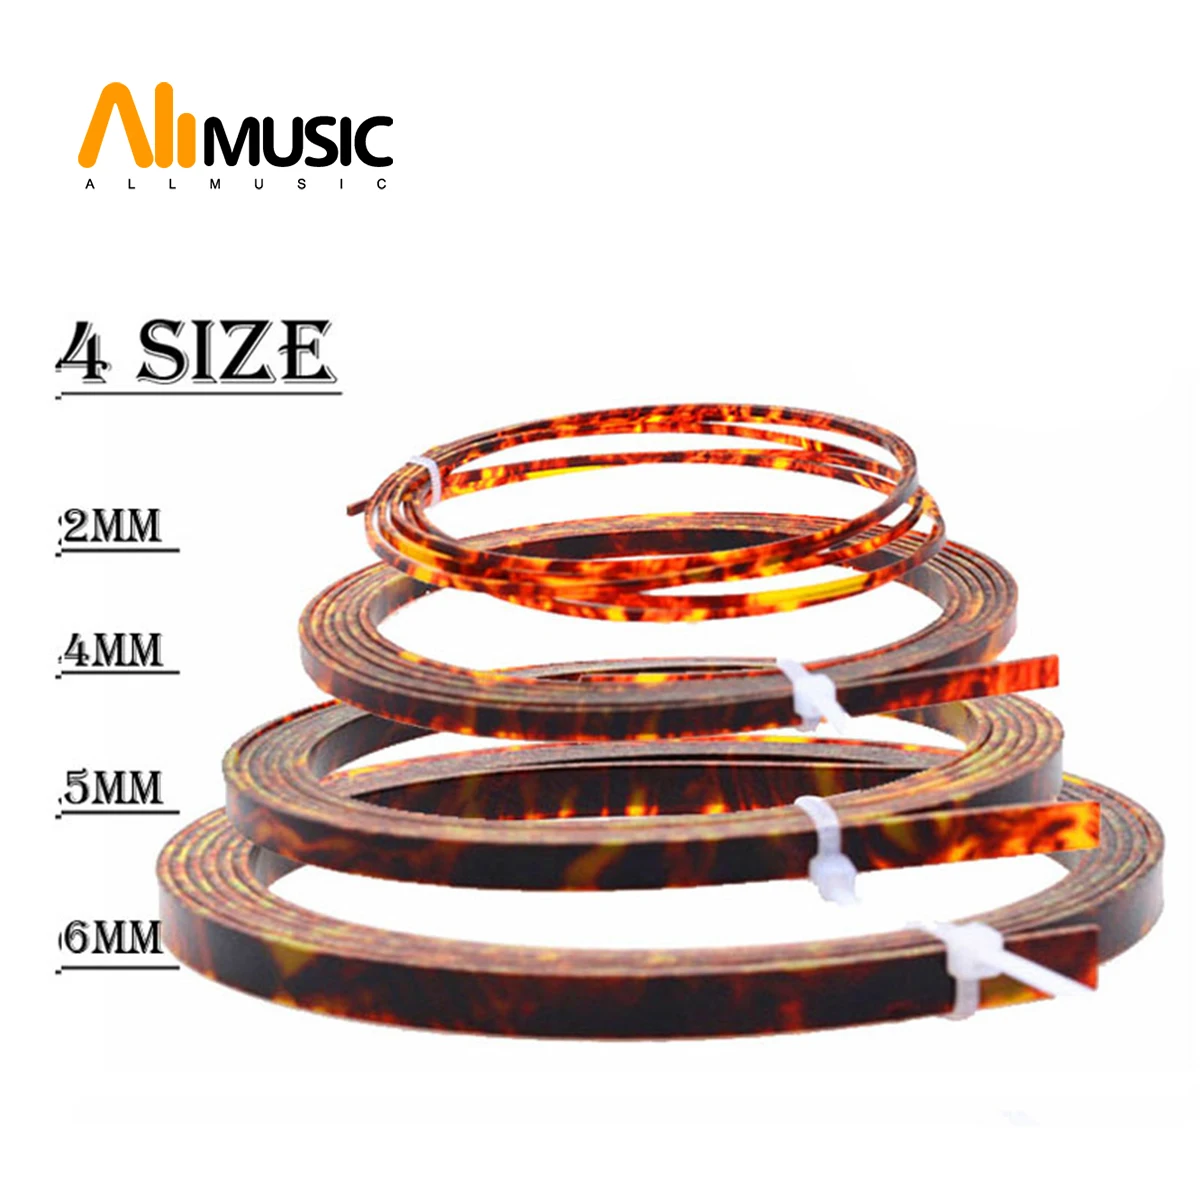 

Colorful Celluloid 6/5/4/2 mm Width Guitar Binding Purfling 5 Feet Length Red Tortoise shell